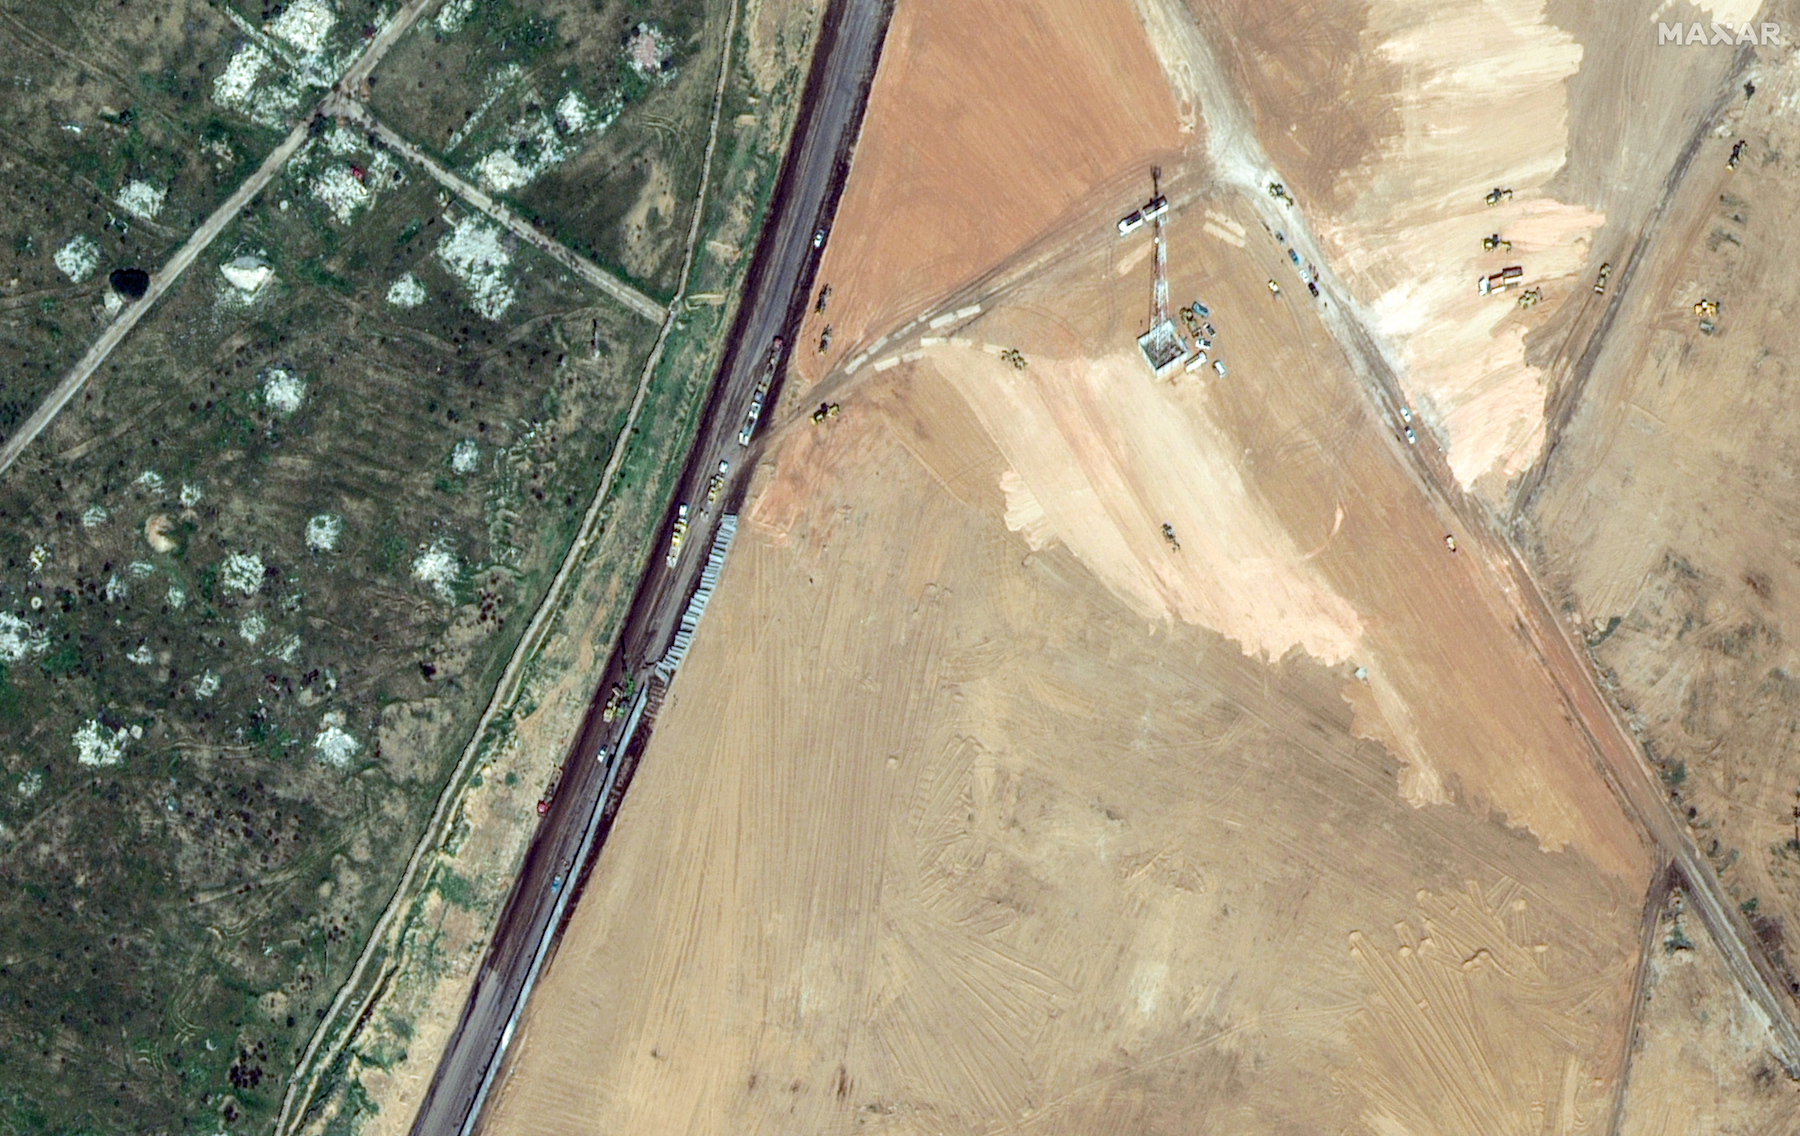 Egypt Has Started Building A Walled Buffer Zone At Its Border With Gaza After Israel Insisted It Will Invade Rafah